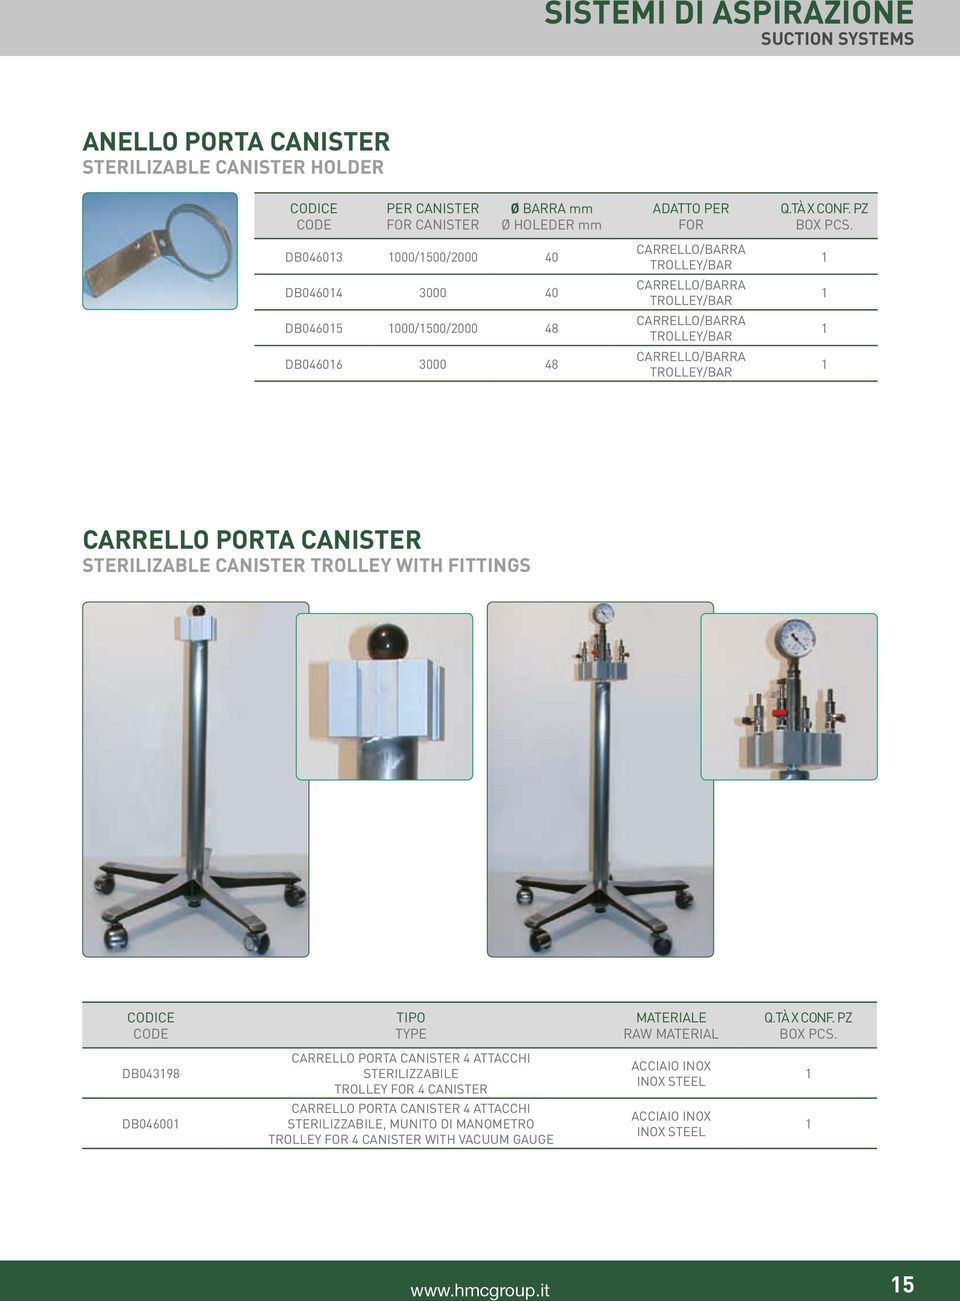 CARRELLO PORTA CANISTER STERILIZABLE CANISTER TROLLEY WITH FITTINGS TIPO TYPE MATERIALE RAW MATERIAL DB043198 CARRELLO PORTA CANISTER 4 ATTACCHI STERILIZZABILE TROLLEY FOR 4 CANISTER